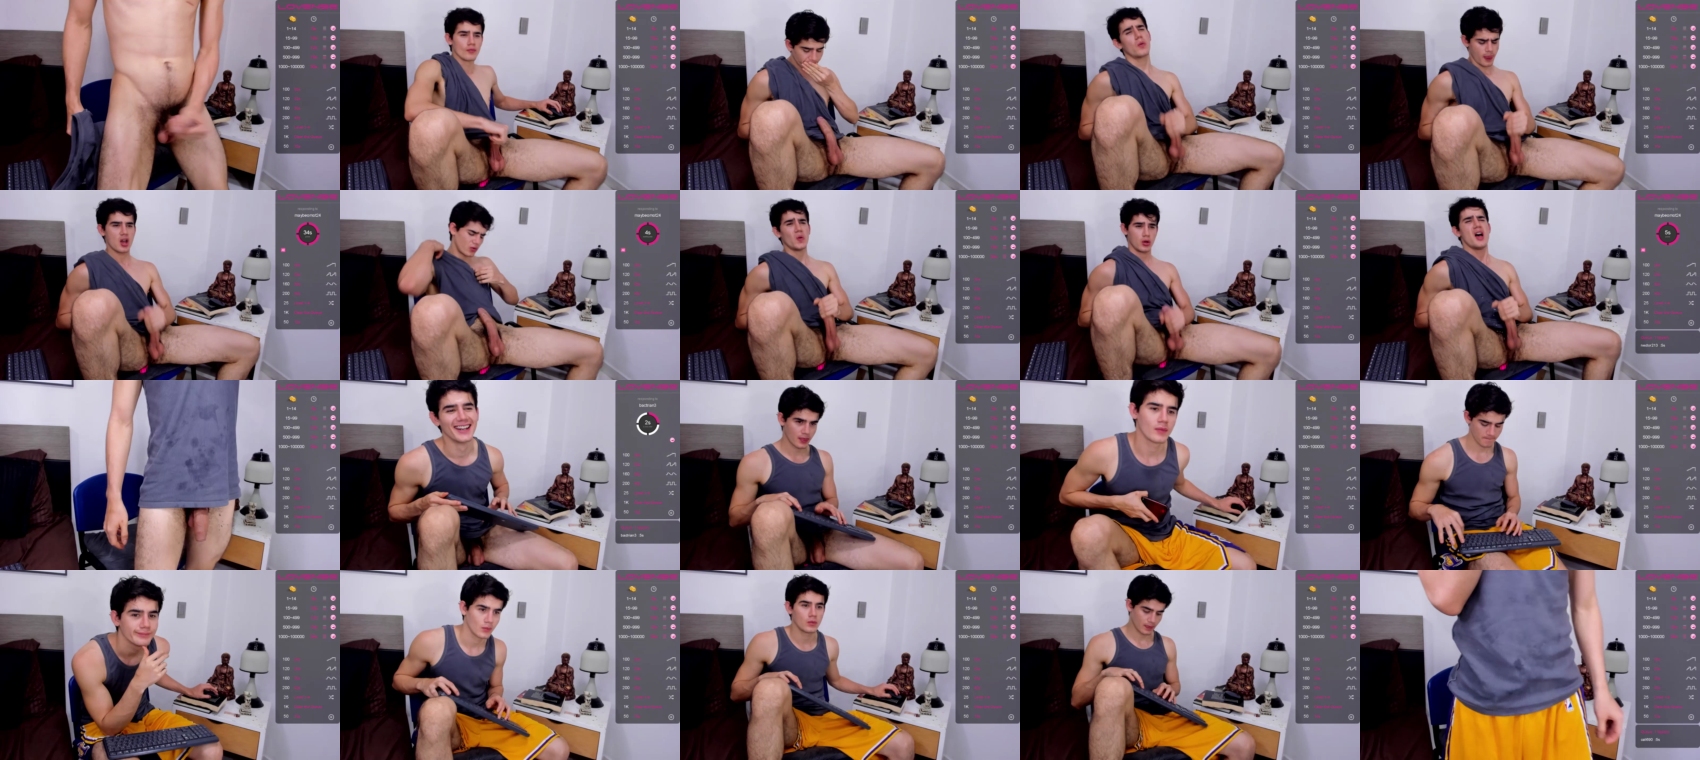 connor_wesley1 Show CAM SHOW @ Chaturbate 22-01-2022